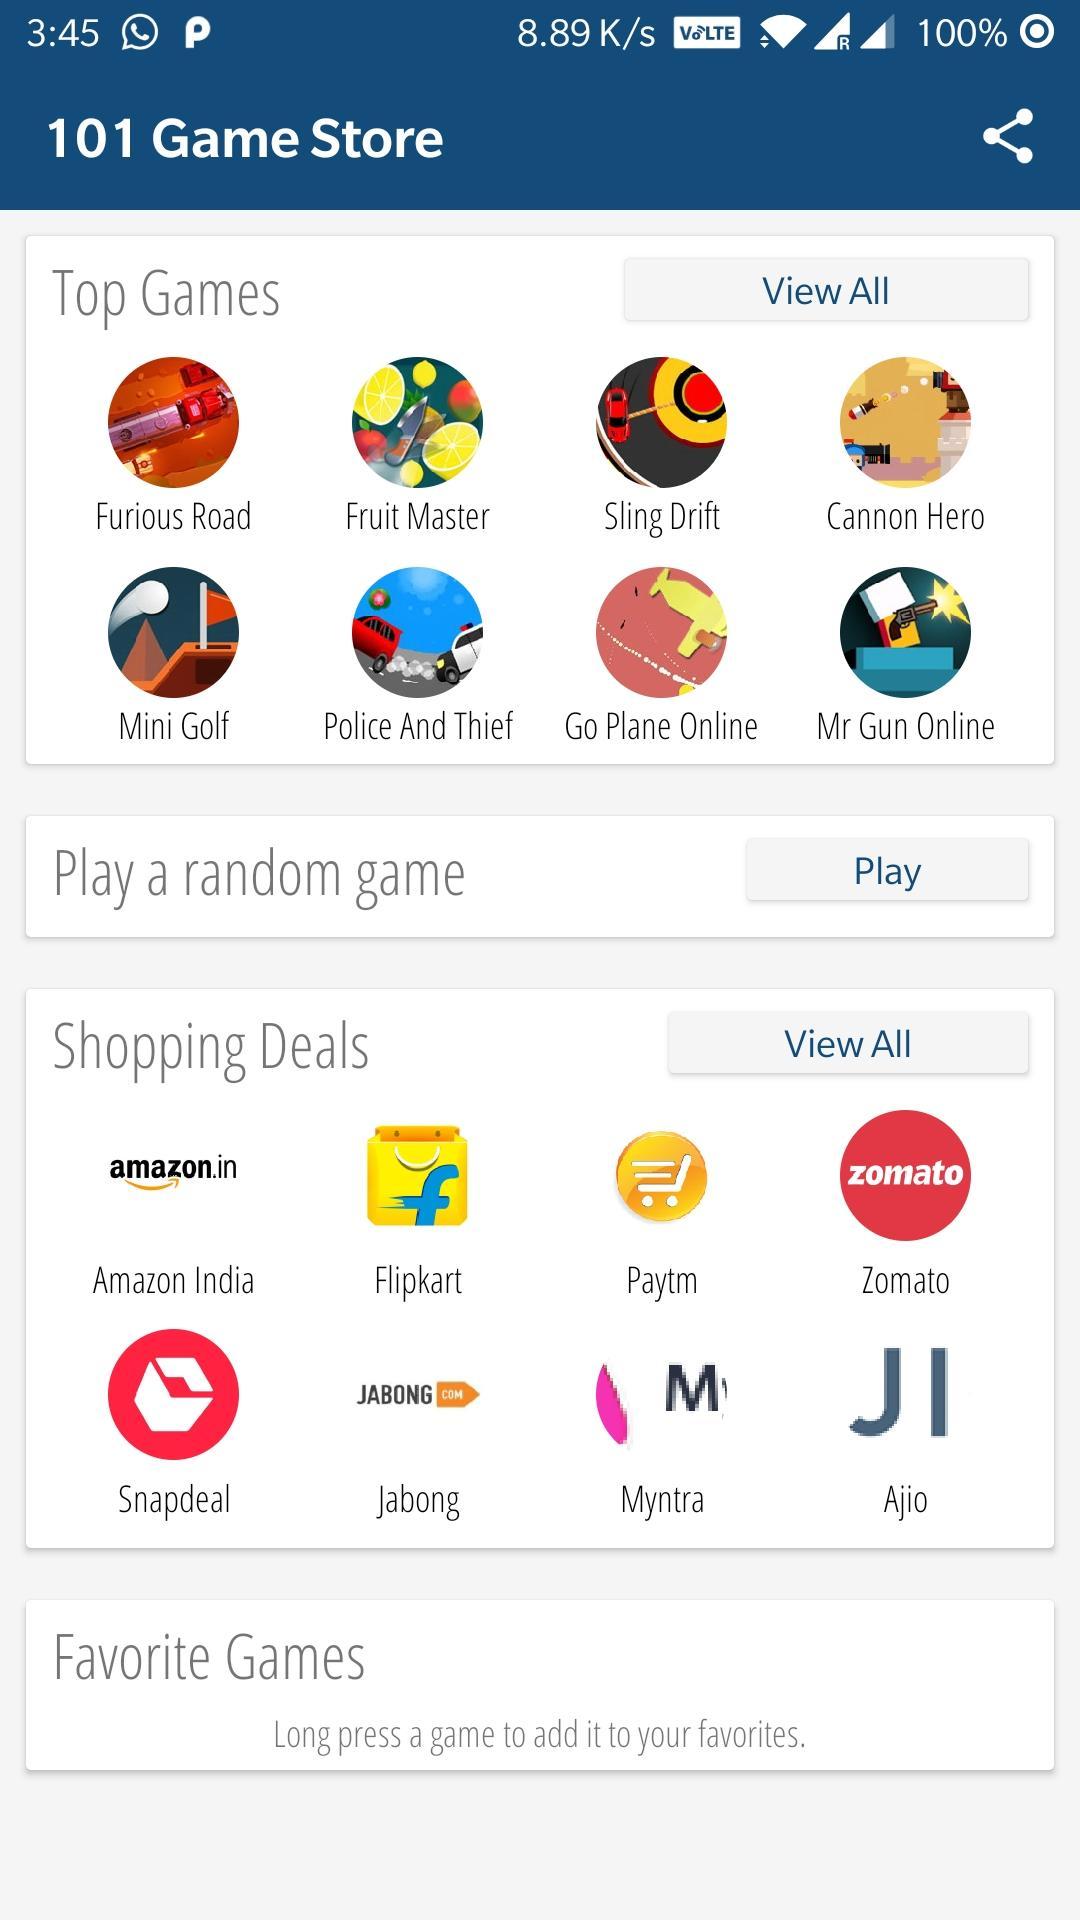 101 Game Store for Android - APK Download